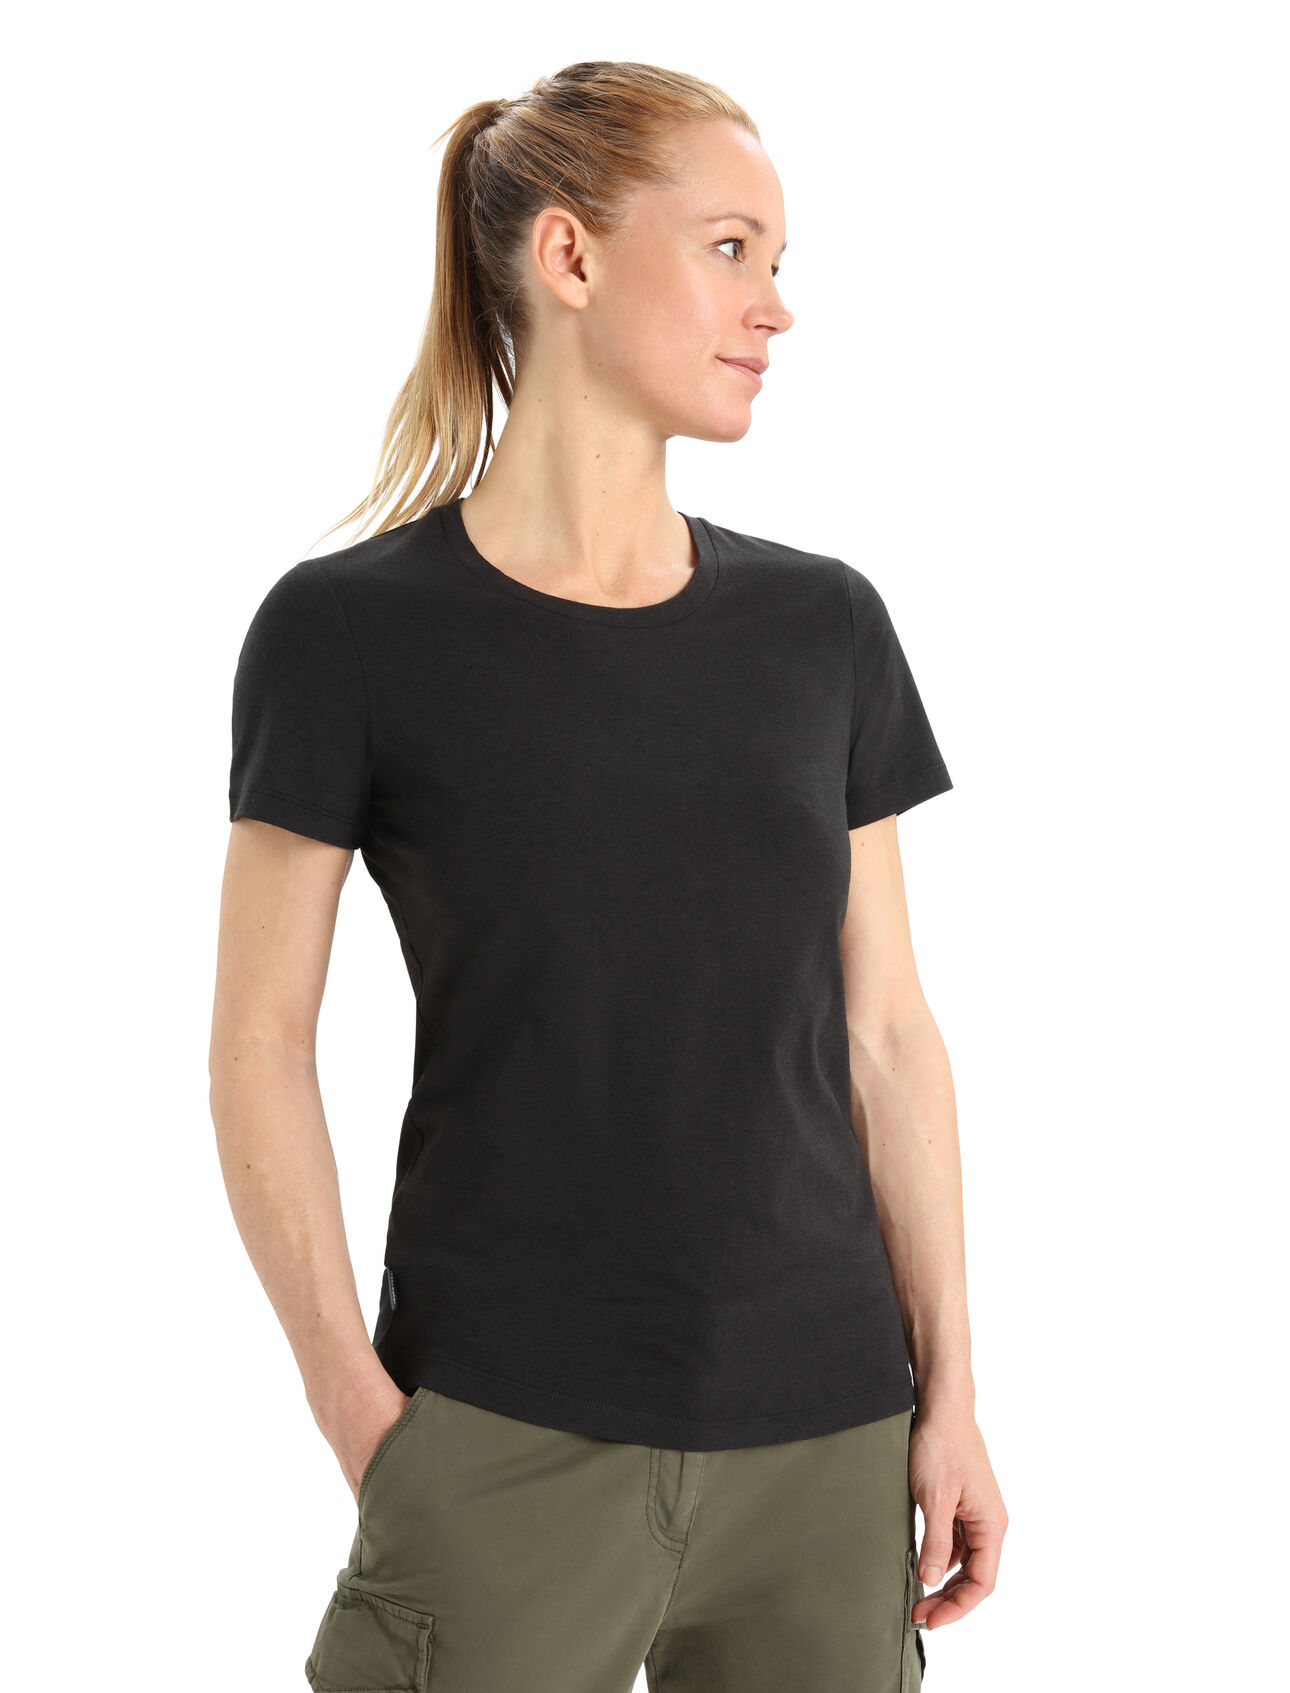 Womens Merino Central Classic Short Sleeve T-Shirt A versatile, everyday tee that goes anywhere in comfort, the Central Classic Short Sleeve Tee features a sustainable blend of natural merino wool and soft organic cotton.